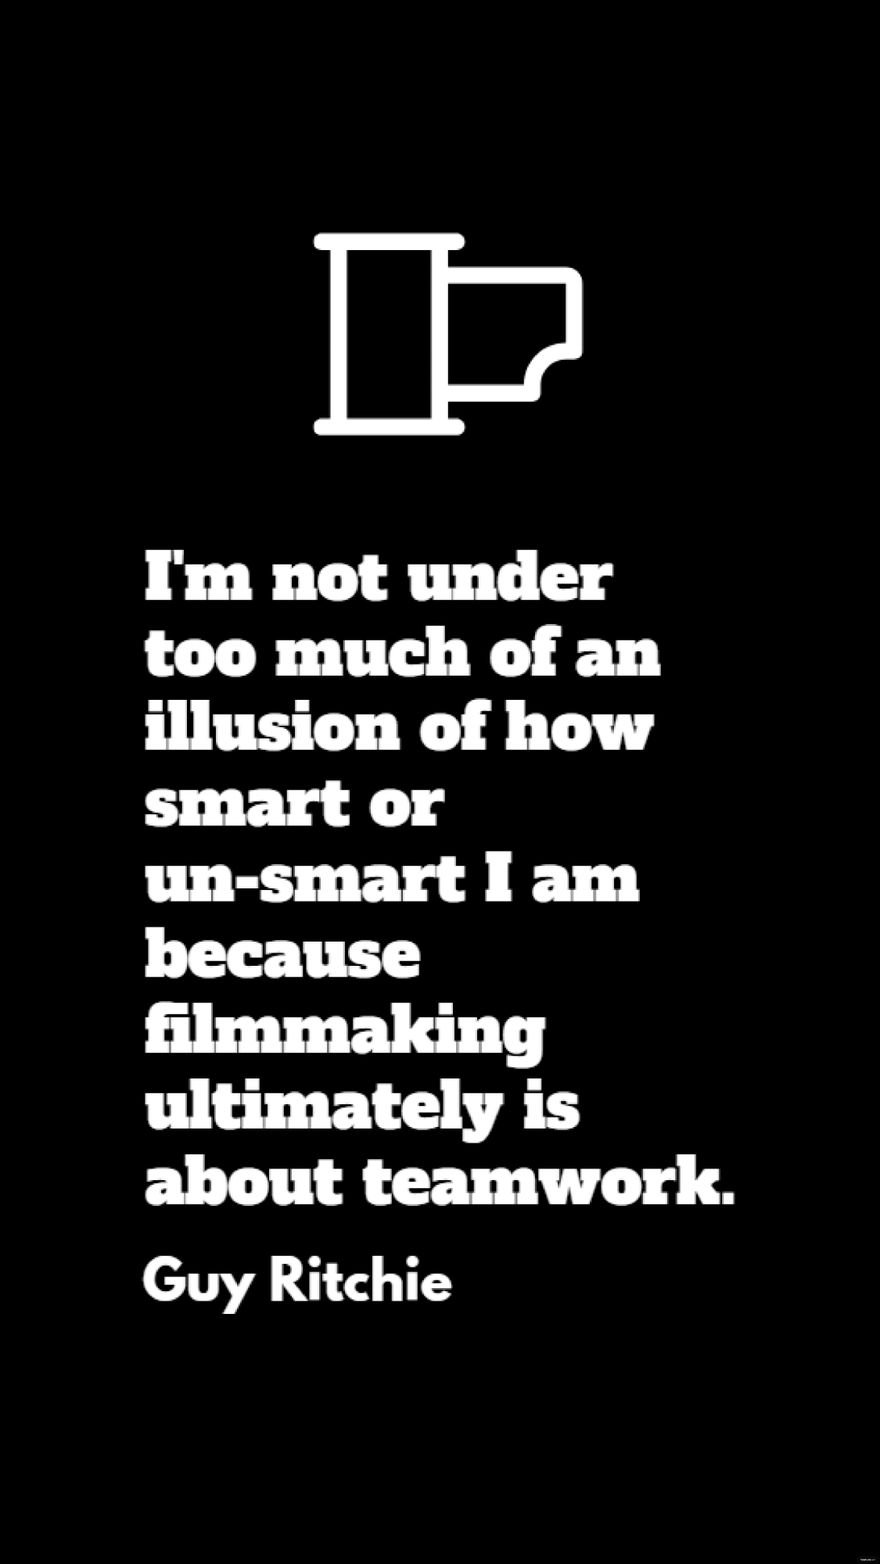 Guy Ritchie - I'm not under too much of an illusion of how smart or un-smart I am because filmmaking ultimately is about teamwork.